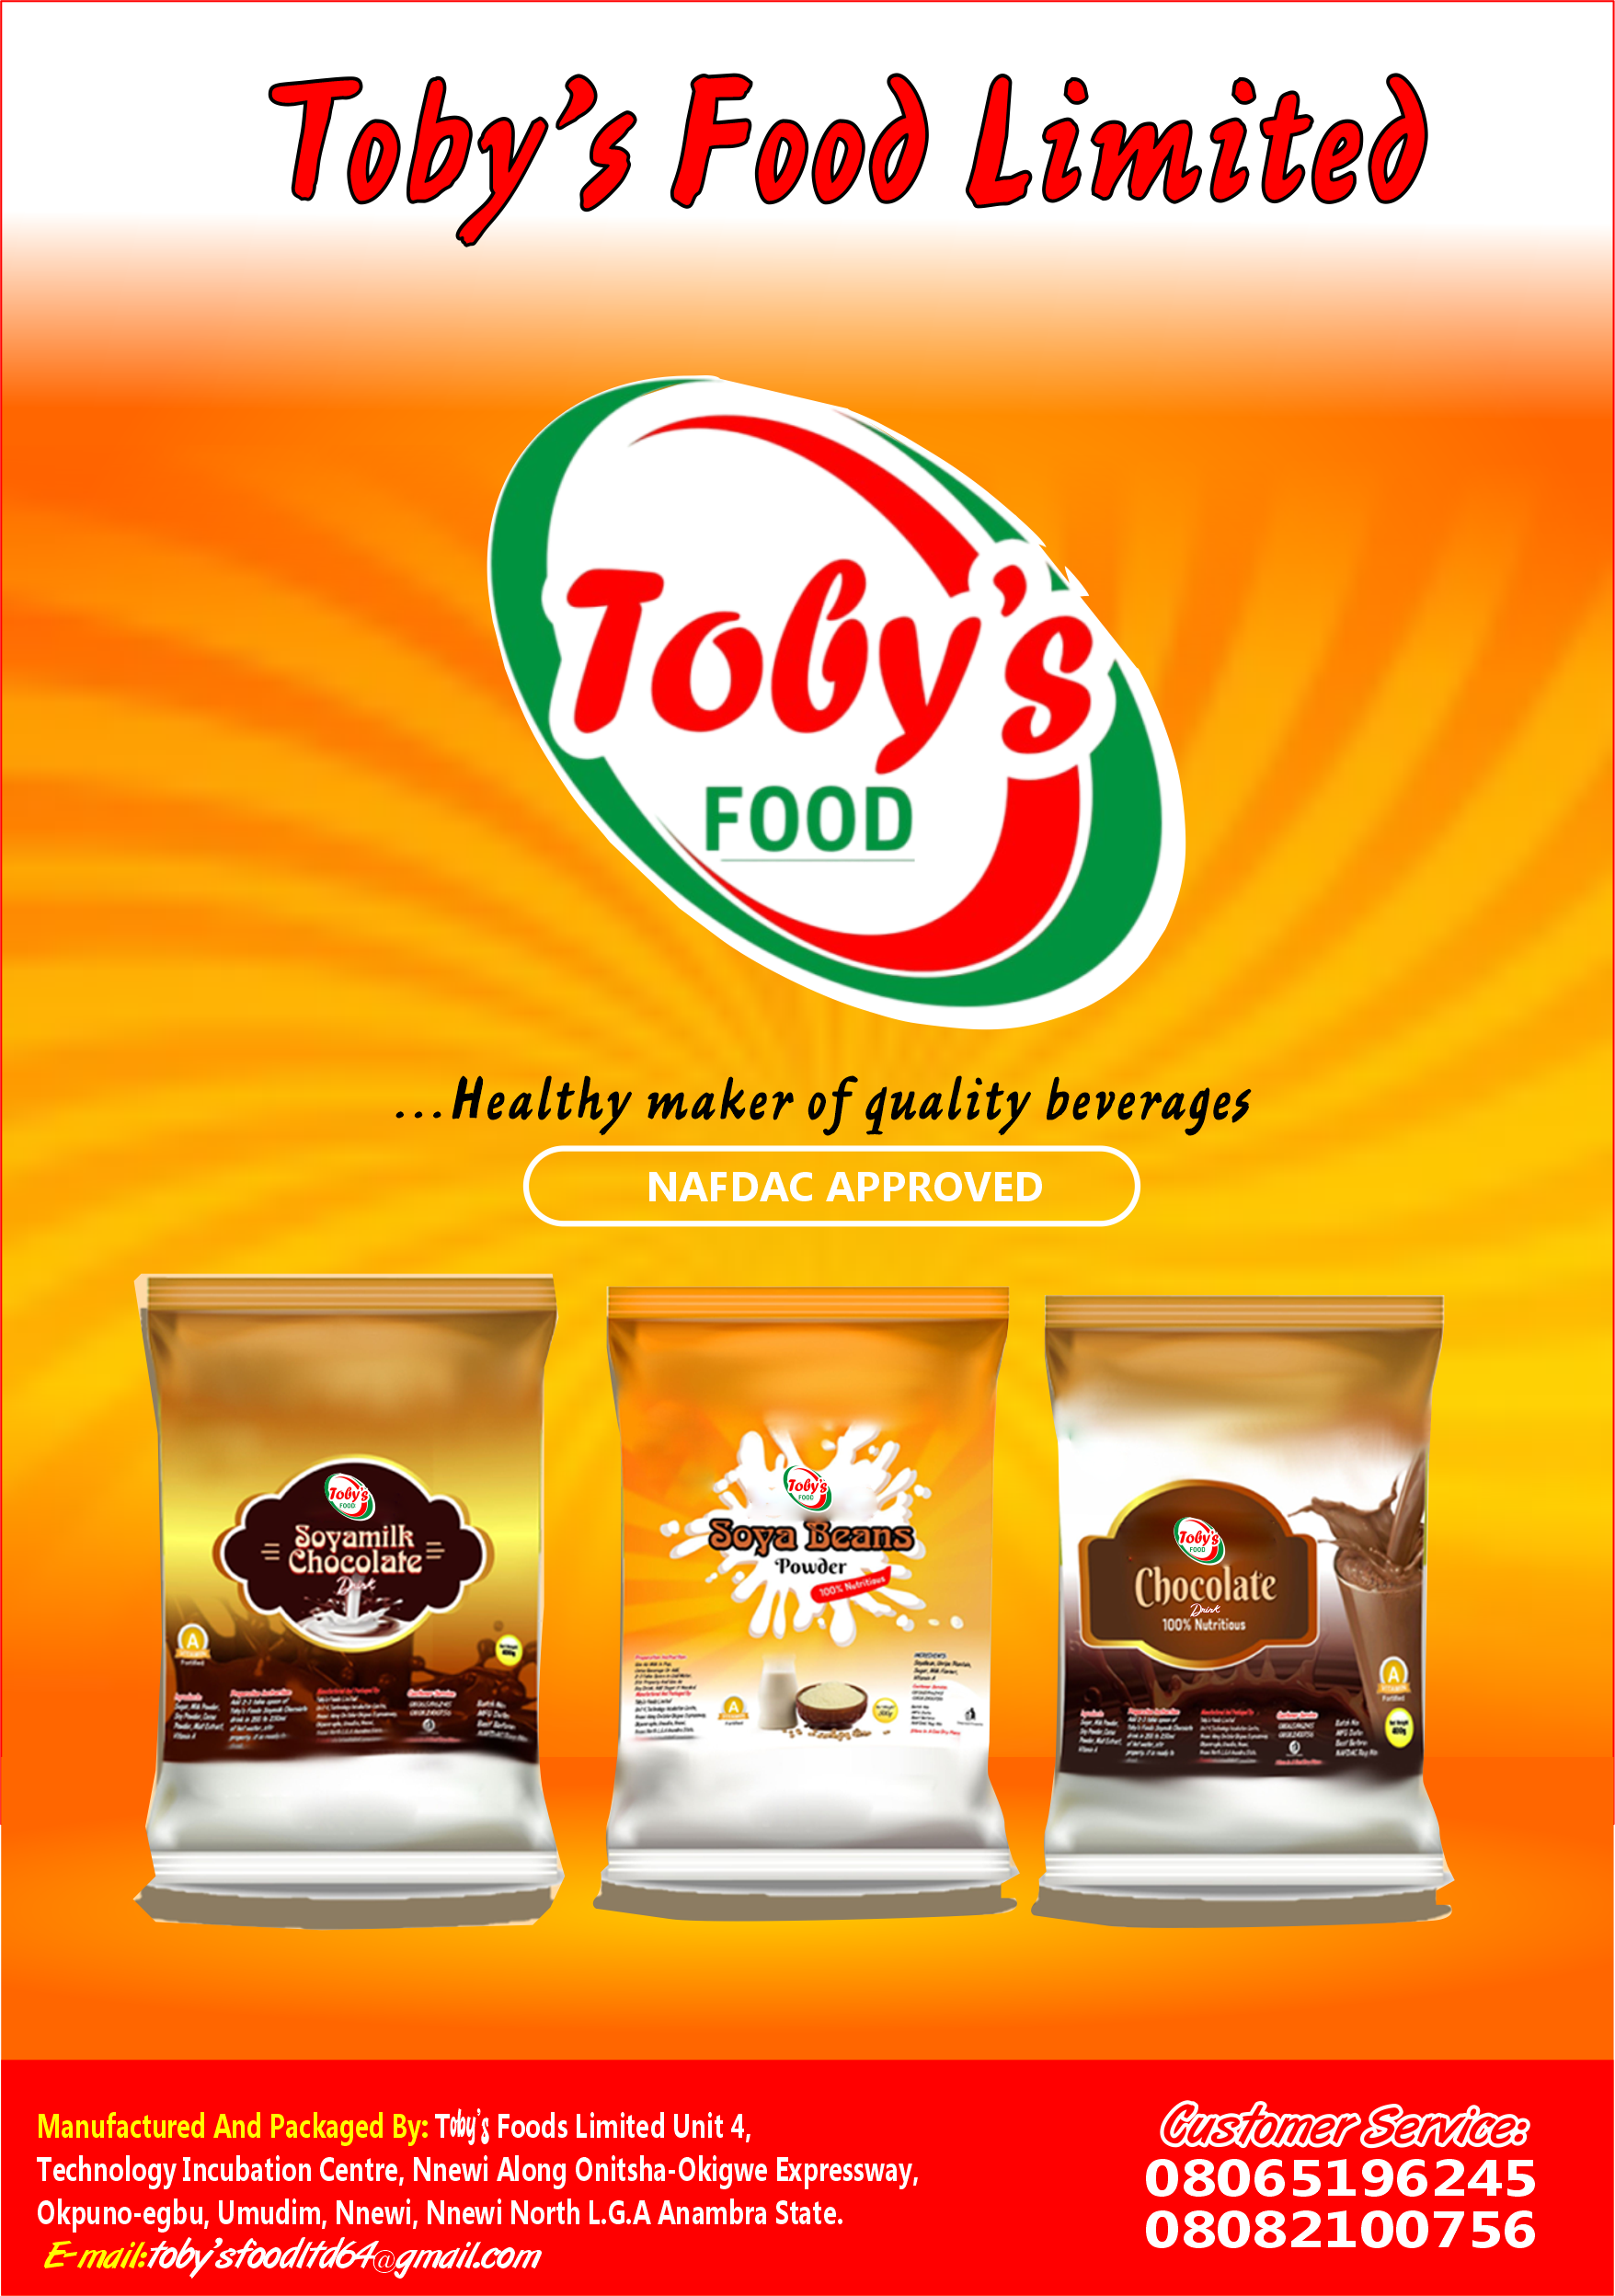 Toby's Food Limited